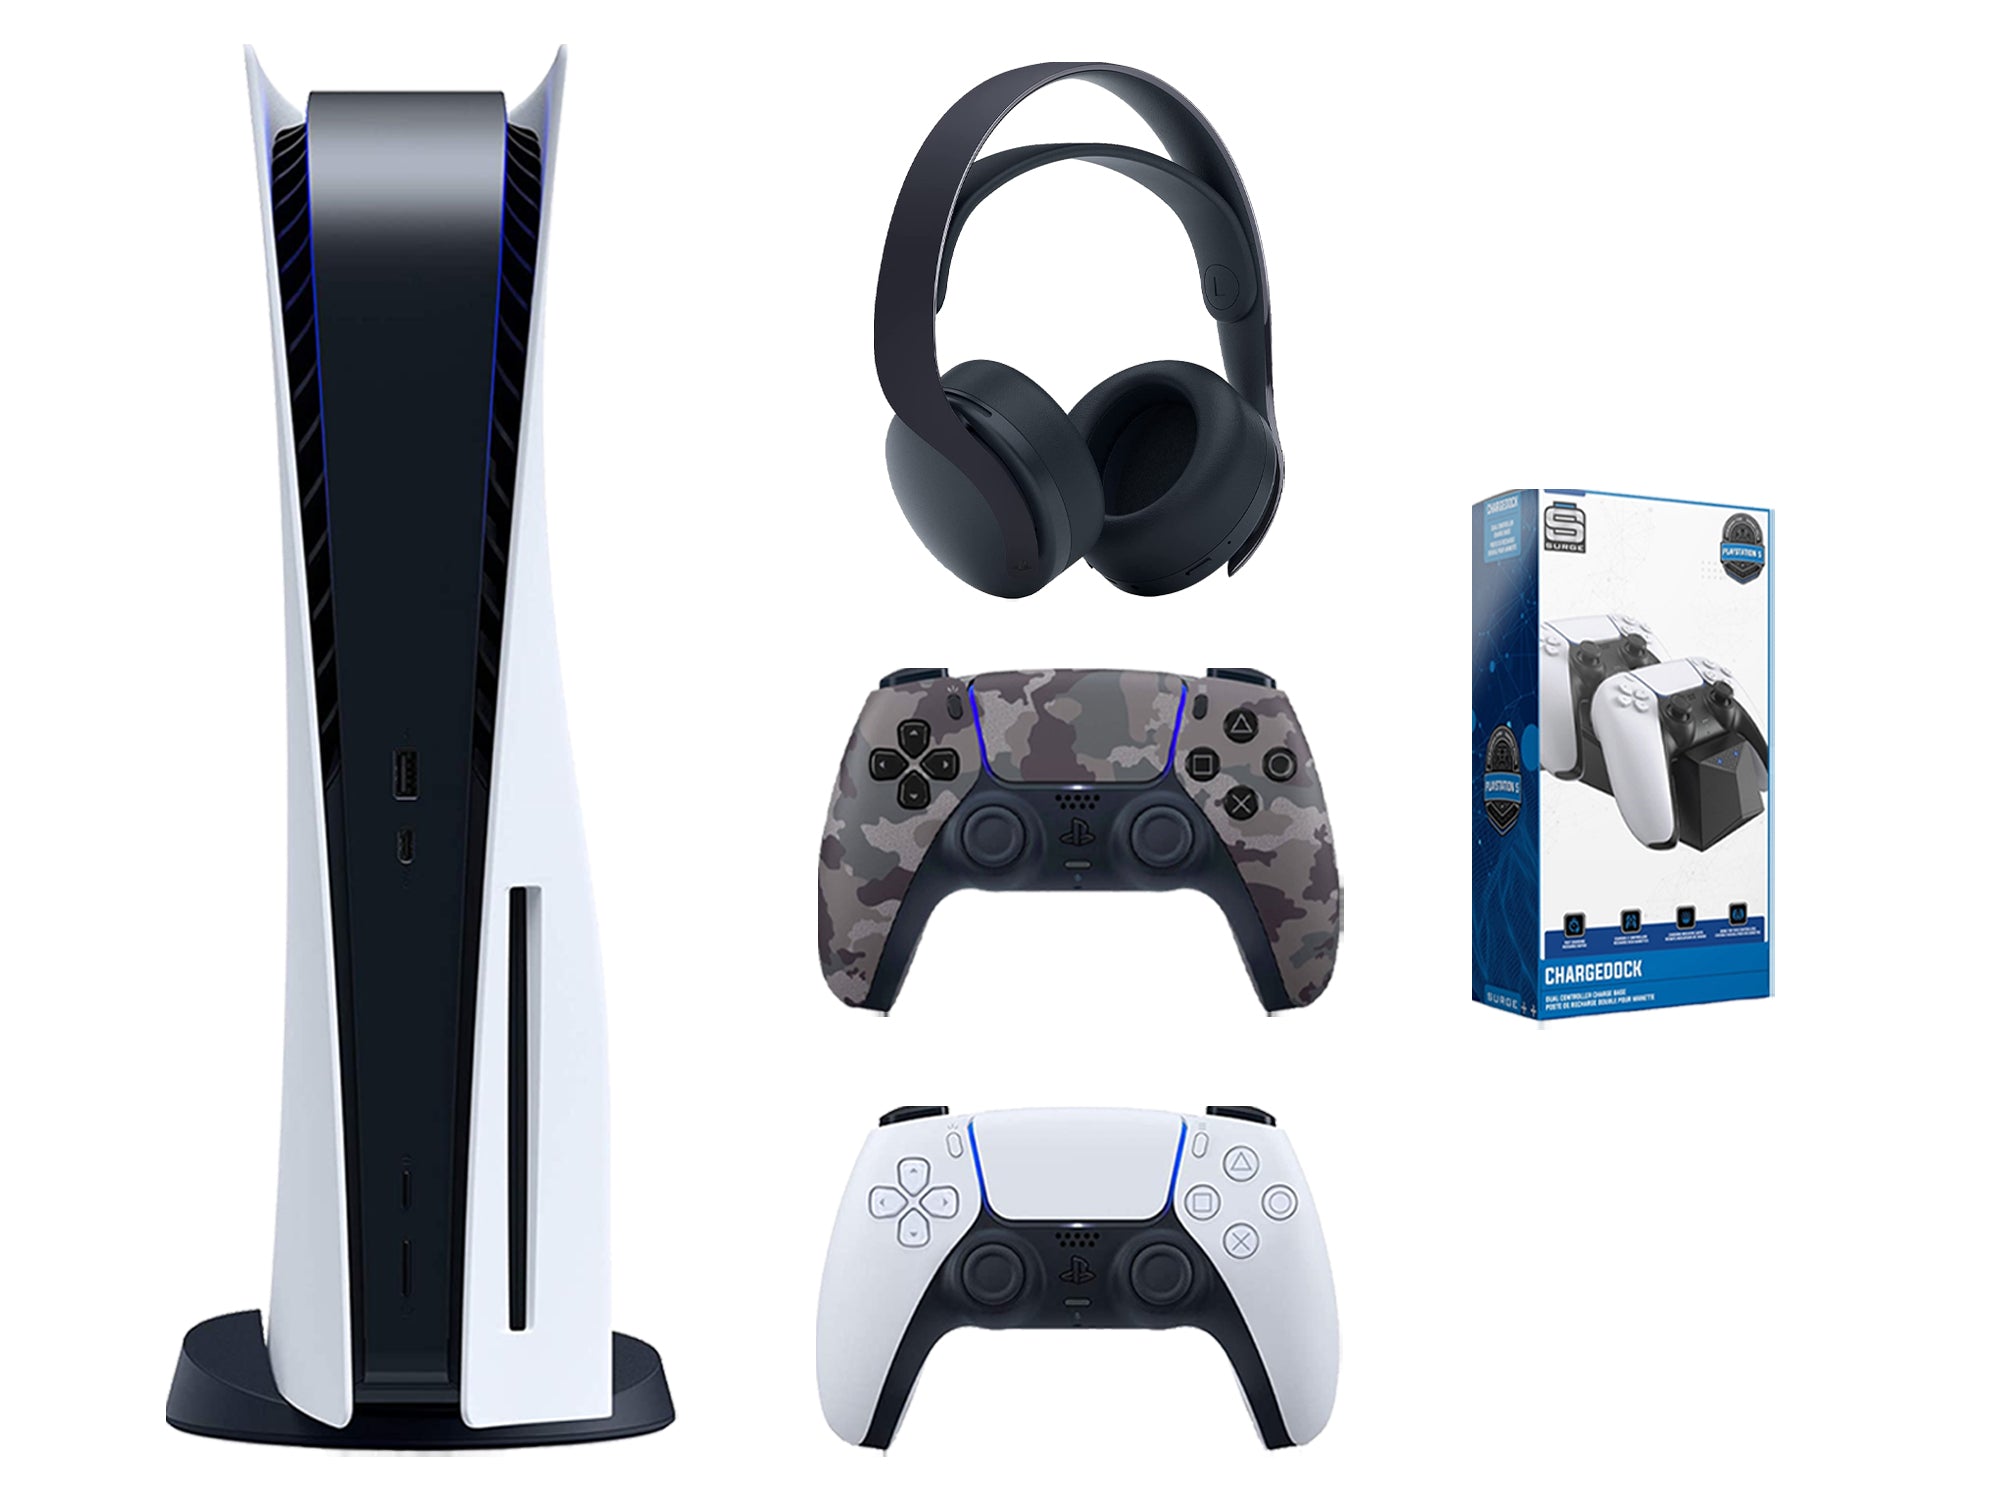 Sony Playstation 5 Disc Edition Bundle with Extra Gray Camo Controller, Black PULSE 3D Wireless Headset and Dual Charging Dock - Pro-Distributing